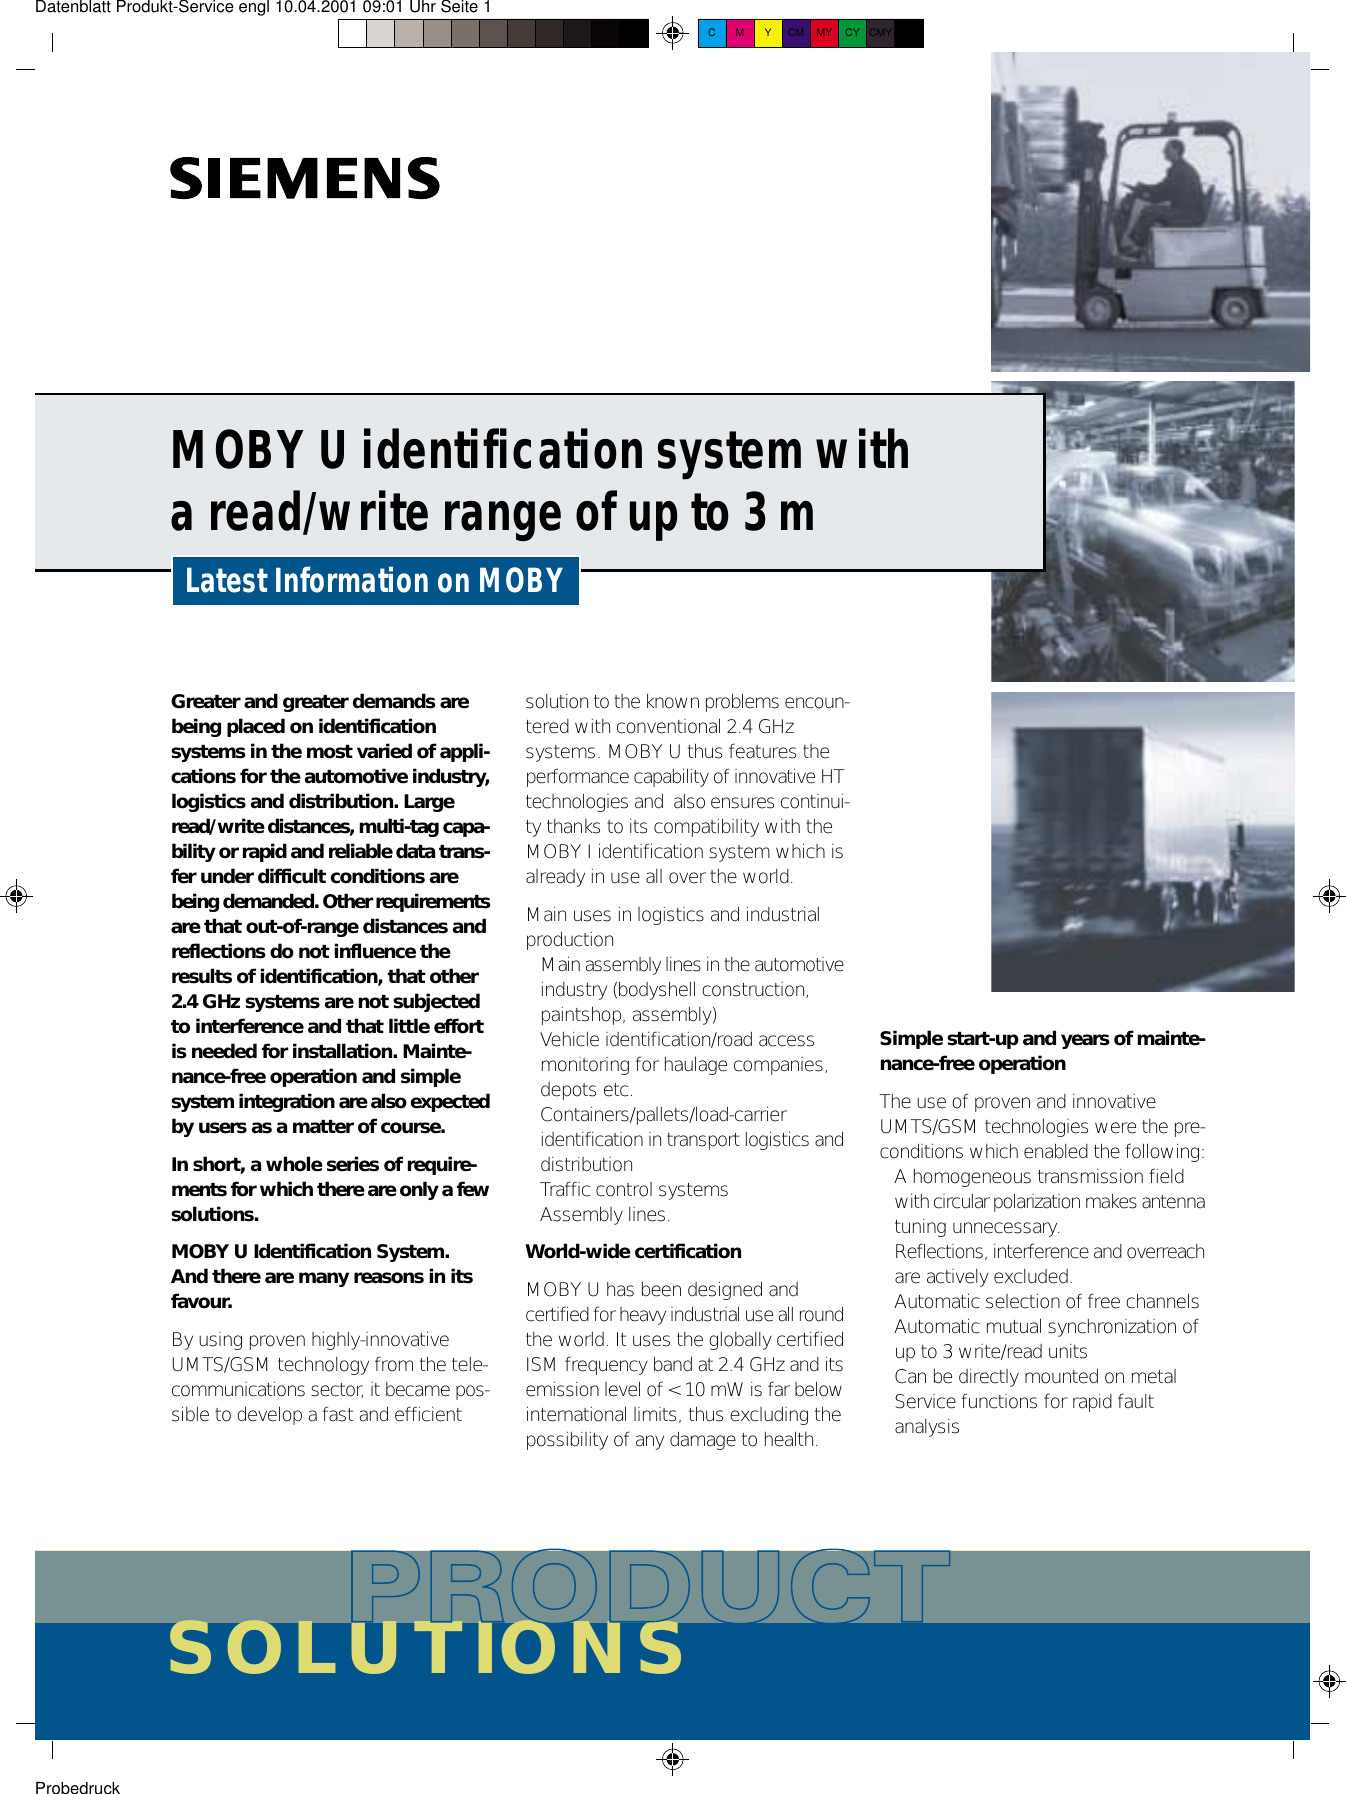 Datenblatt Produkt-Service engl 10.04.2001 09:01 Uhr Seite 1 ProbedruckC M Y CM MY CY CMY KMOBY U identification system witha read/write range of up to 3 mSOLUTIONSLatest Information on MOBYGreater and greater demands arebeing placed on identificationsystems in the most varied of appli-cations for the automotive industry,logistics and distribution. Largeread/write distances, multi-tag capa-bility or rapid and reliable data trans-fer under difficult conditions arebeing demanded. Other requirementsare that out-of-range distances andreflections do not influence theresults of identification, that other2.4 GHz systems are not subjectedto interference and that little effortis needed for installation. Mainte-nance-free operation and simplesystem integration are also expectedby users as a matter of course.In short, a whole series of require-ments for which there are only a fewsolutions.MOBY U Identification System.And there are many reasons in itsfavour.By using proven highly-innovativeUMTS/GSM technology from the tele-communications sector, it became pos-sible to develop a fast and efficientsolution to the known problems encoun-tered with conventional 2.4 GHzsystems. MOBY U thus features theperformance capability of innovative HTtechnologies and  also ensures continui-ty thanks to its compatibility with theMOBY I identification system which isalready in use all over the world.Main uses in logistics and industrialproduction• Main assembly lines in the automotiveindustry (bodyshell construction, paintshop, assembly)• Vehicle identification/road access monitoring for haulage companies, depots etc.• Containers/pallets/load-carrier identification in transport logistics anddistribution• Traffic control systems• Assembly lines.World-wide certificationMOBY U has been designed andcertified for heavy industrial use all roundthe world. It uses the globally certifiedISM frequency band at 2.4 GHz and itsemission level of &lt; 10 mW is far belowinternational limits, thus excluding thepossibility of any damage to health.Simple start-up and years of mainte-nance-free operationThe use of proven and innovativeUMTS/GSM technologies were the pre-conditions which enabled the following:• A homogeneous transmission field with circular polarization makes antennatuning unnecessary.• Reflections, interference and overreachare actively excluded.• Automatic selection of free channels• Automatic mutual synchronization of up to 3 write/read units• Can be directly mounted on metal• Service functions for rapid faultanalysis